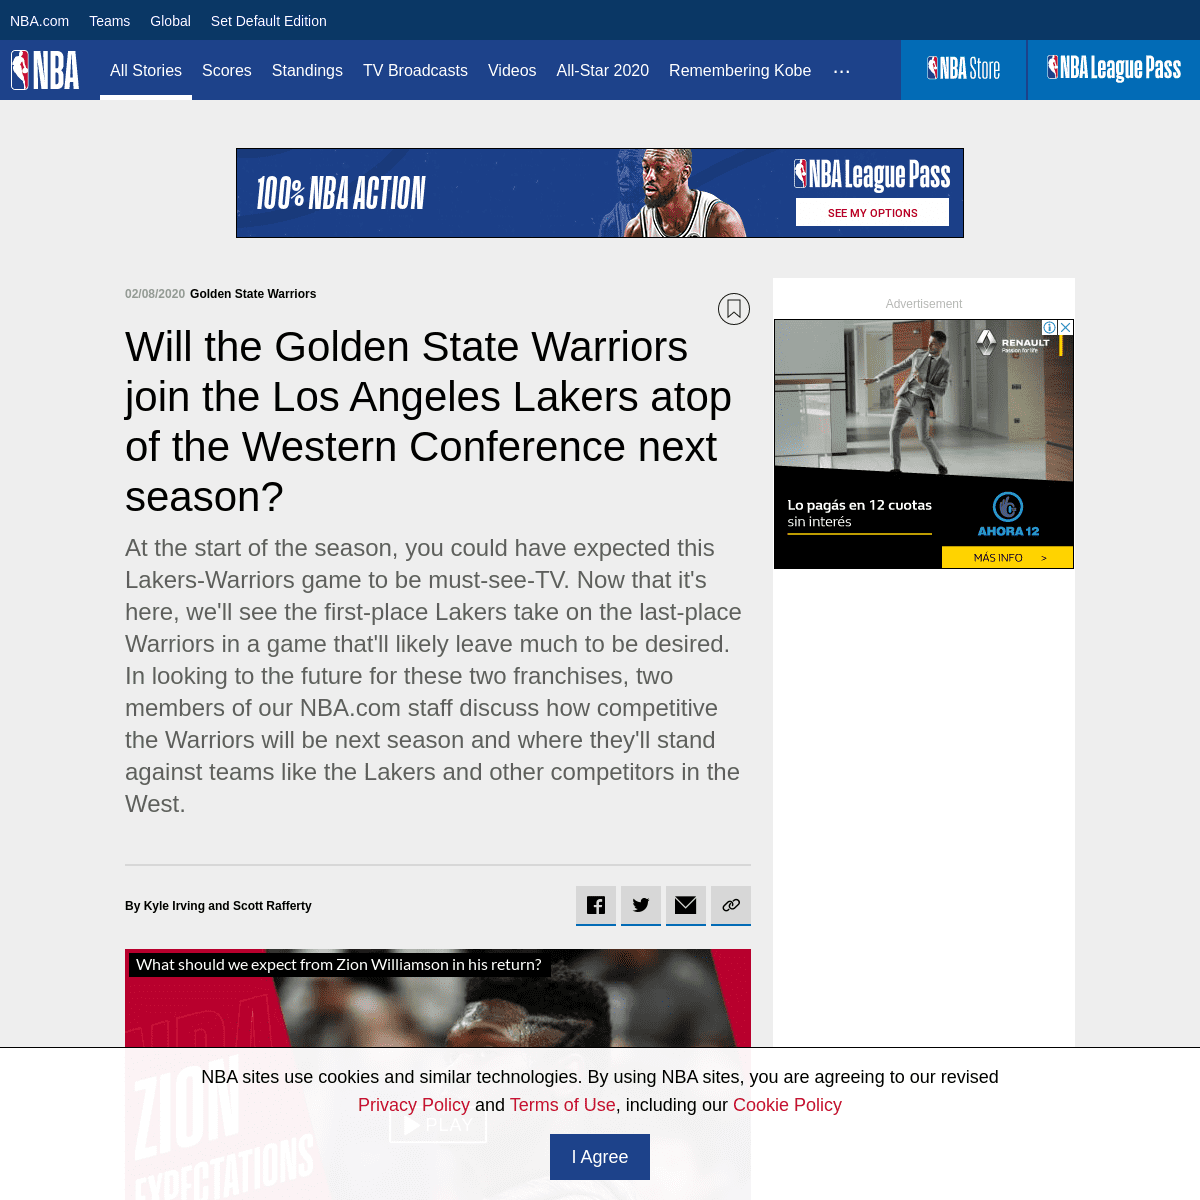 A complete backup of in.nba.com/news/golden-state-warriors-los-angeles-lakers-stephen-curry-klay-thompson-lebron-james-andrew-wi